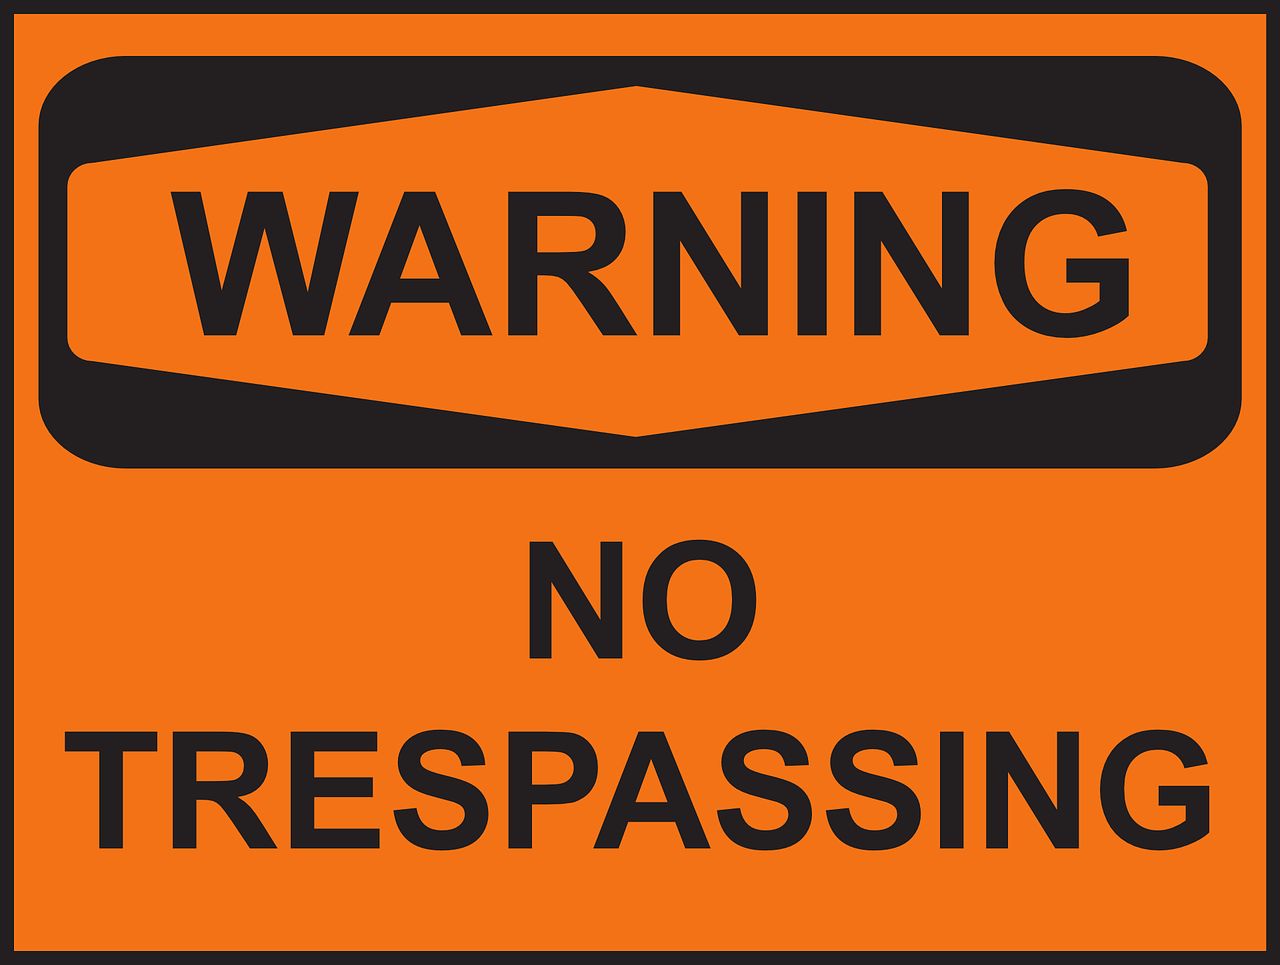 a warning sign with the words no trespassing on it, by George Manson, pixabay, happening, orange safety labels, -w 1024, stock photo, serious expression